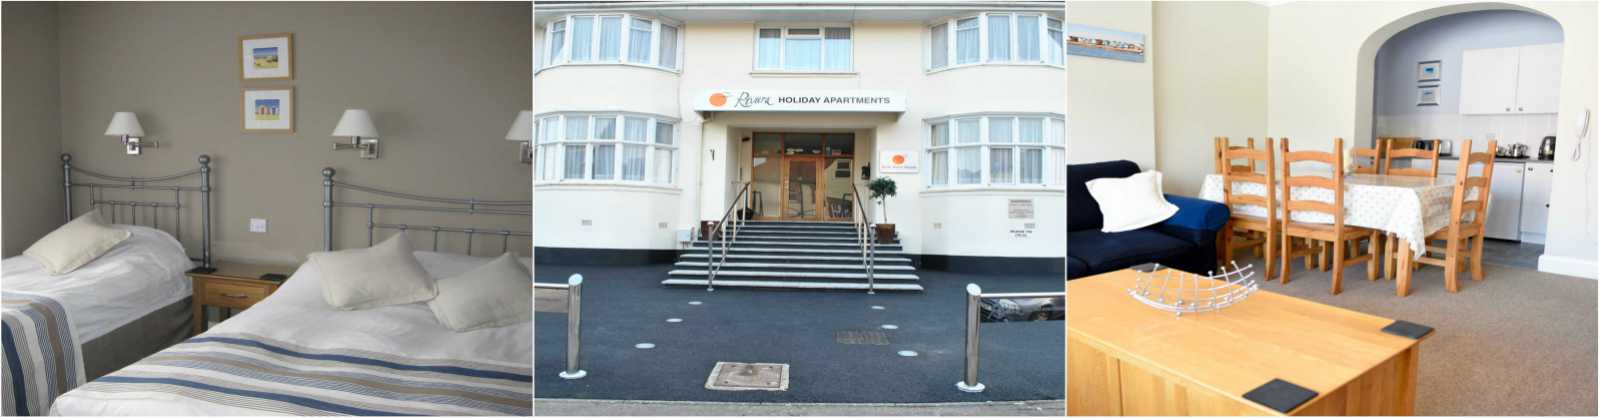 Apartment Bournemouth & Self Catering Holiday Apartments Poole